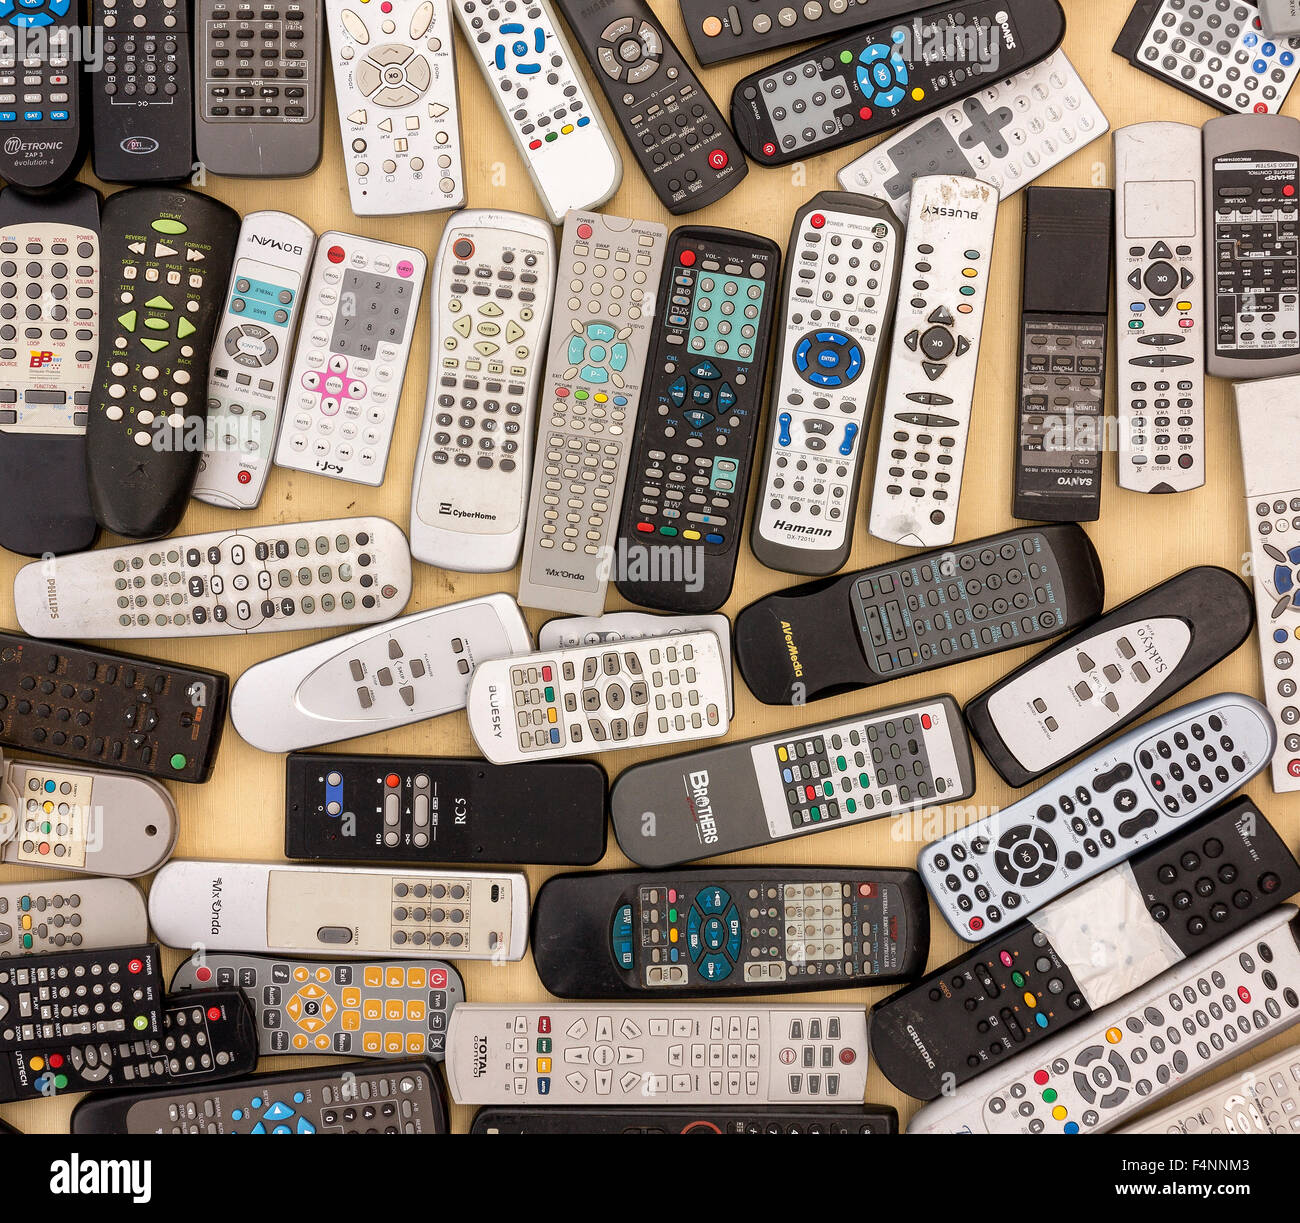 Remote controls, electronic waste Stock Photo